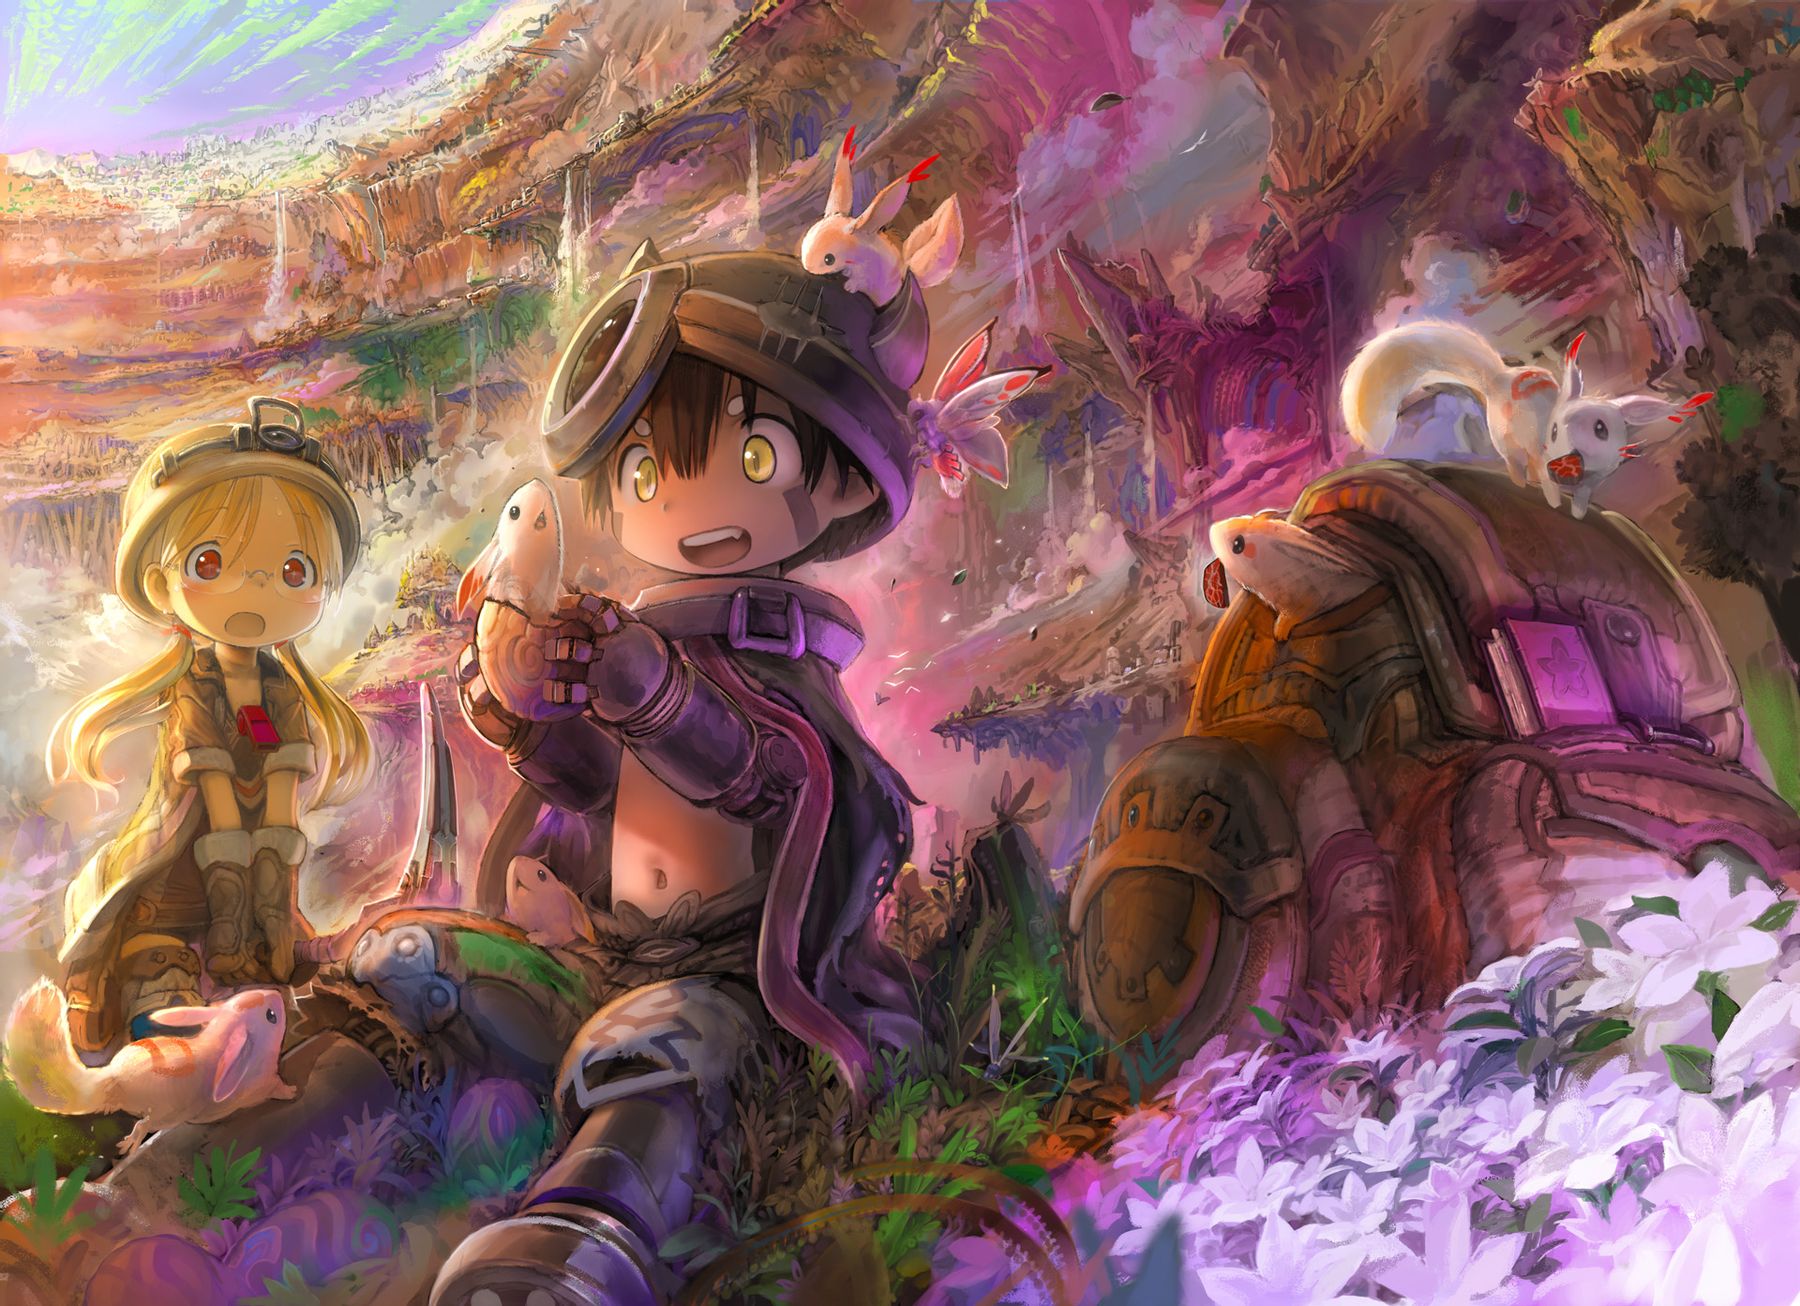 Made in Abyss бездна